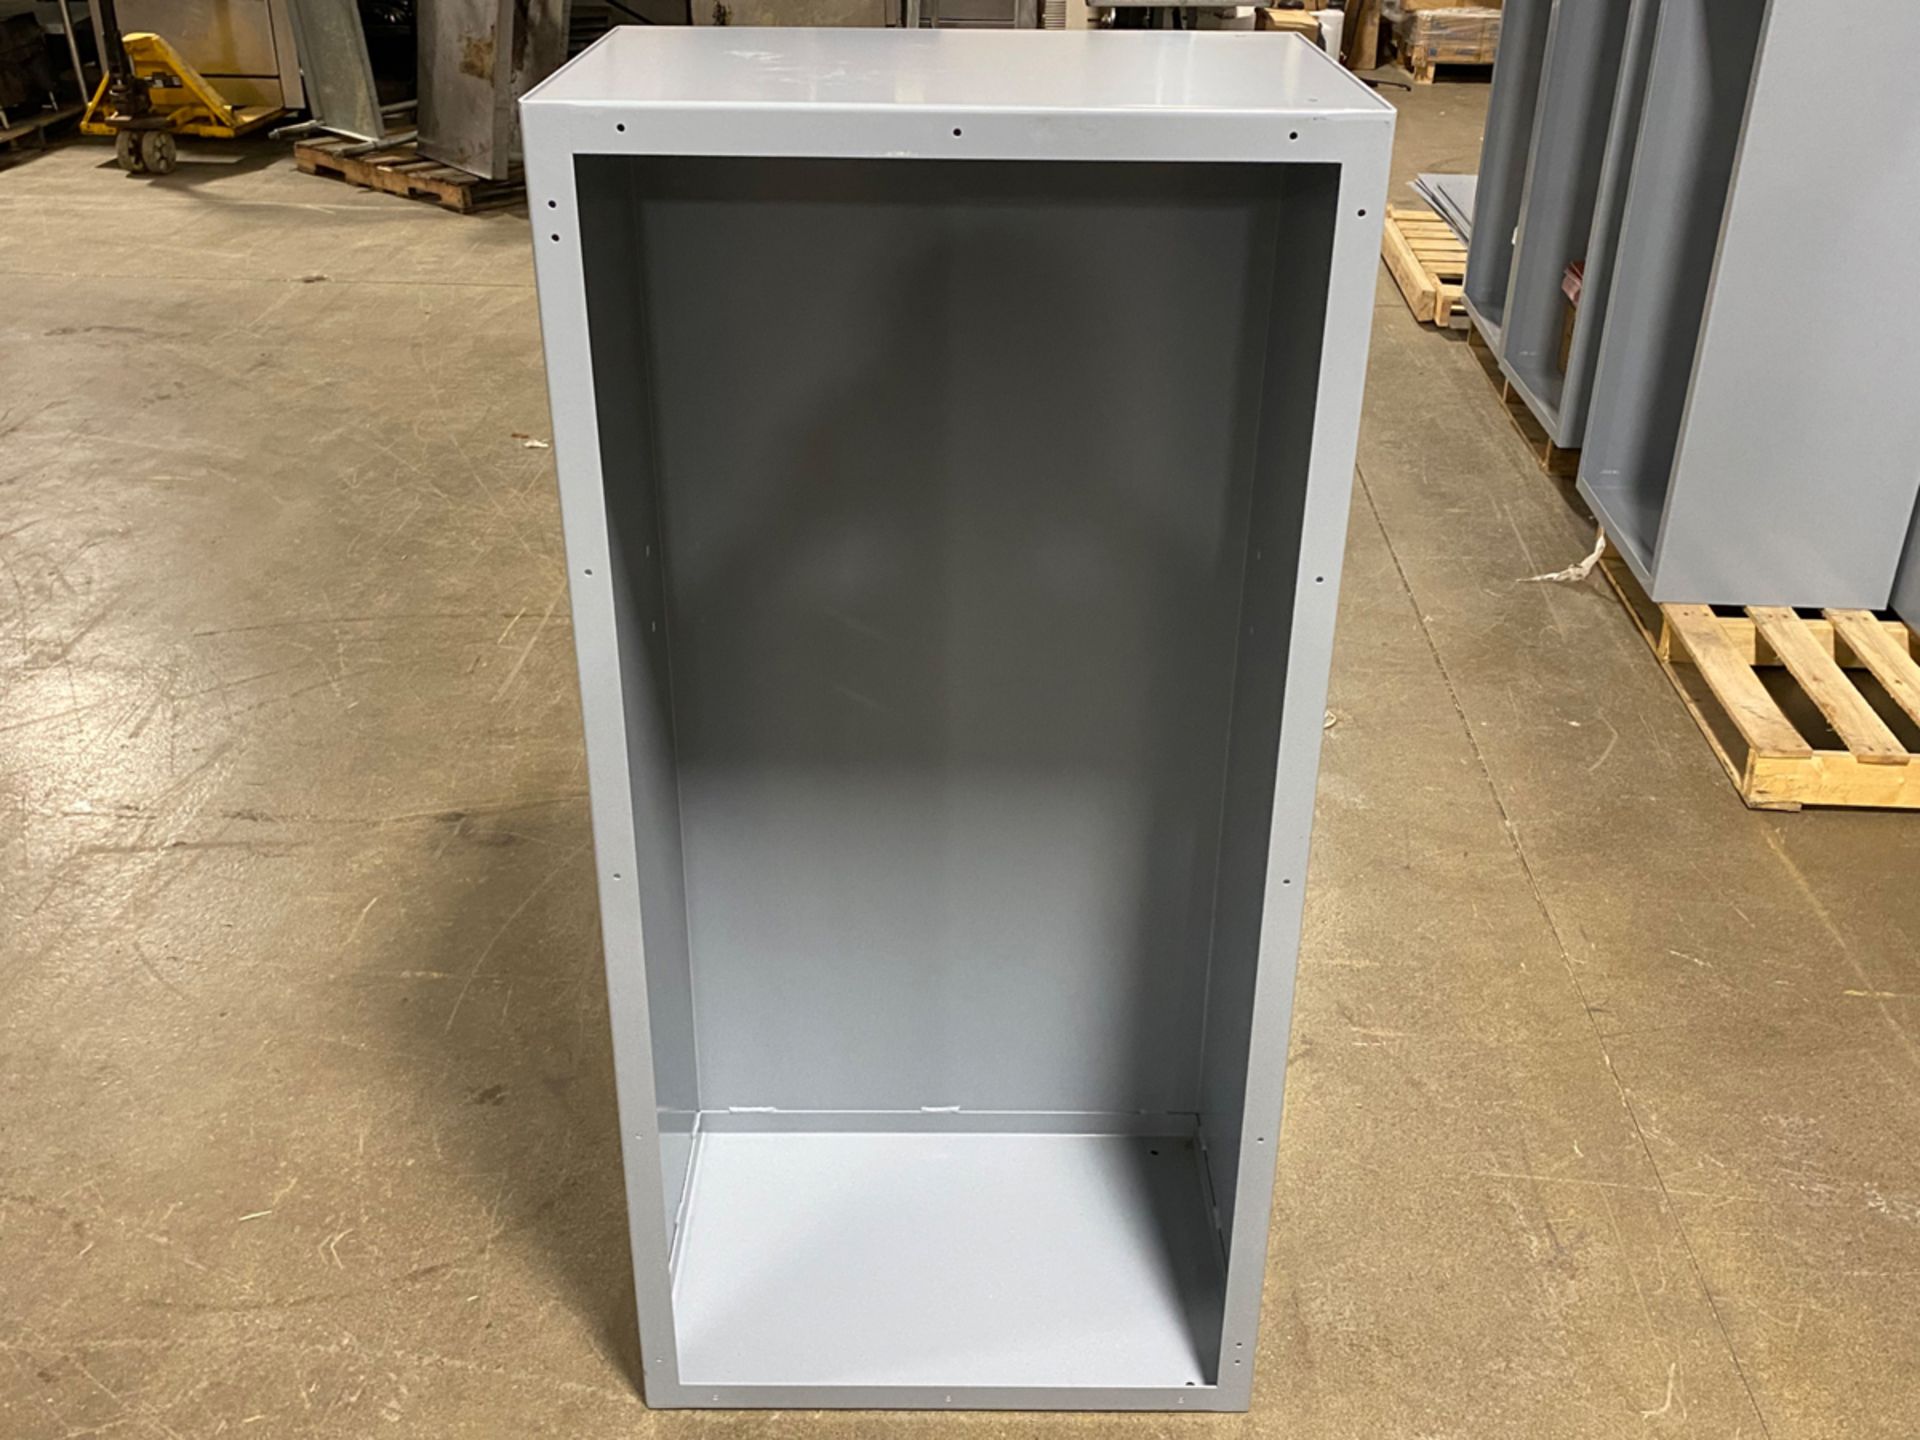 26"L x 18"W x 54"H Steel Electrical Conduit Cabinet - Image 2 of 7